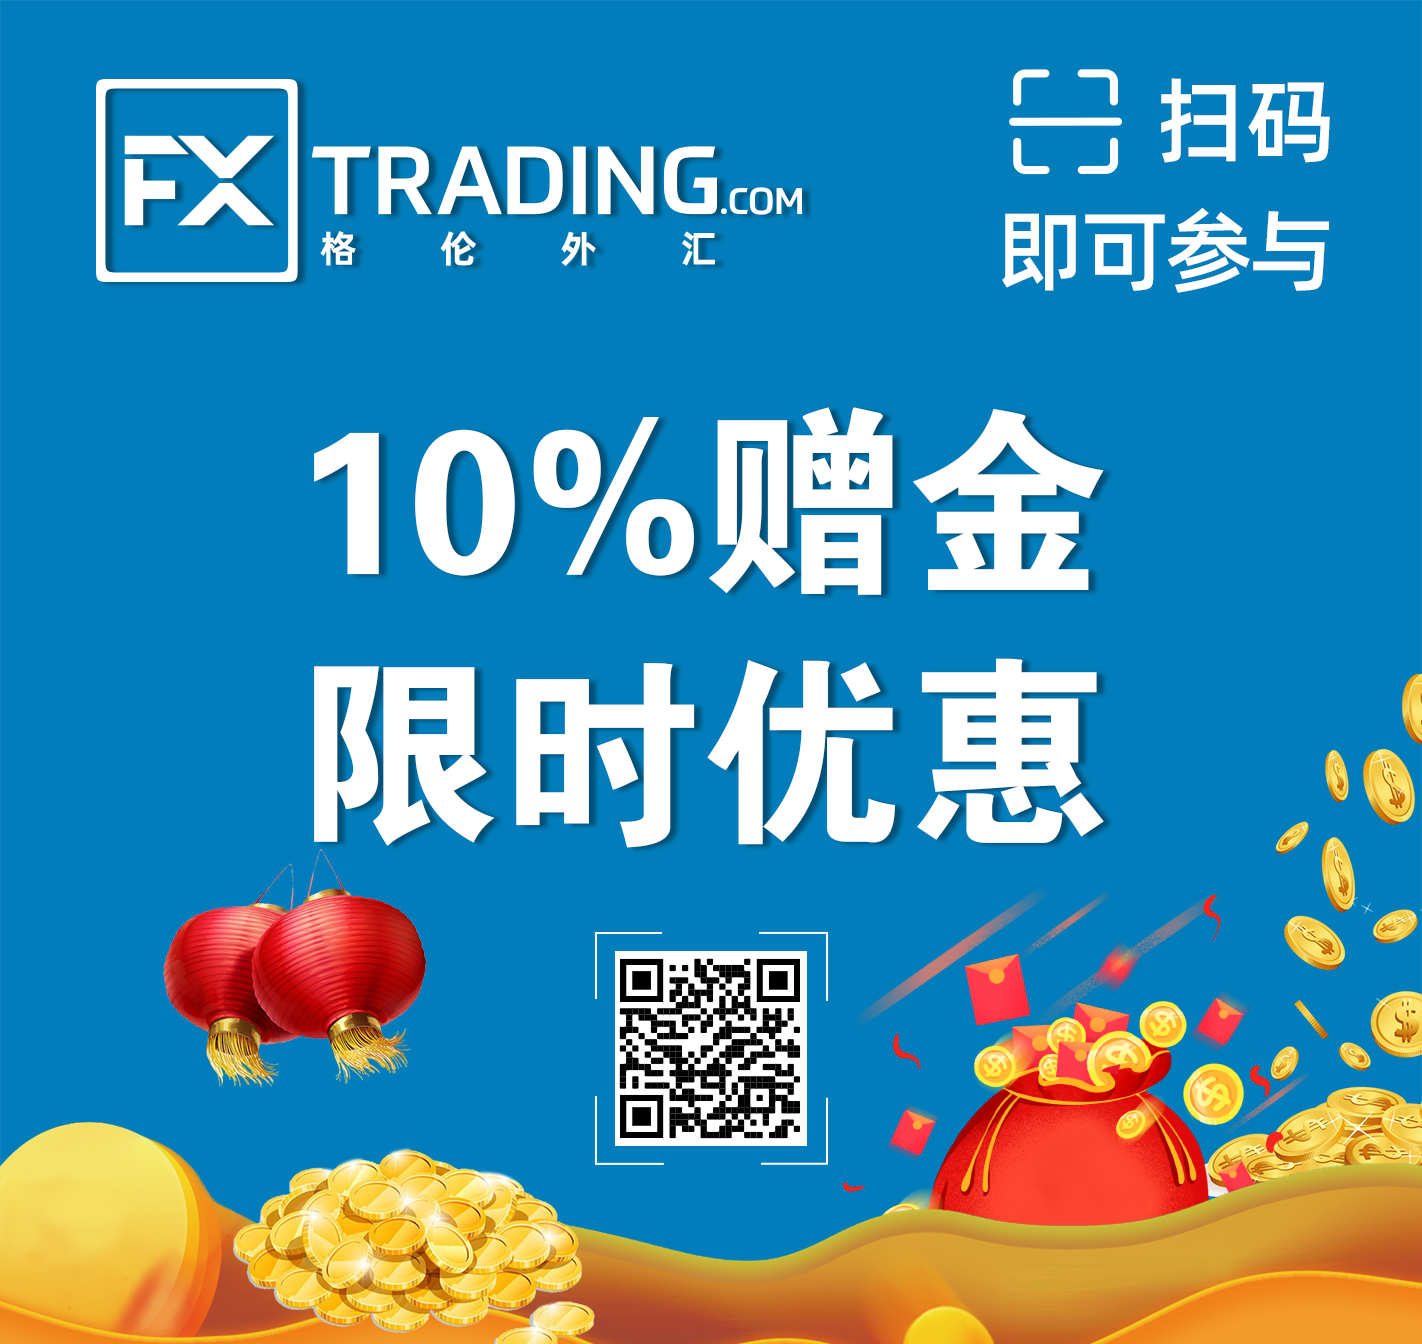 FXTRADING.com-10%_110.png